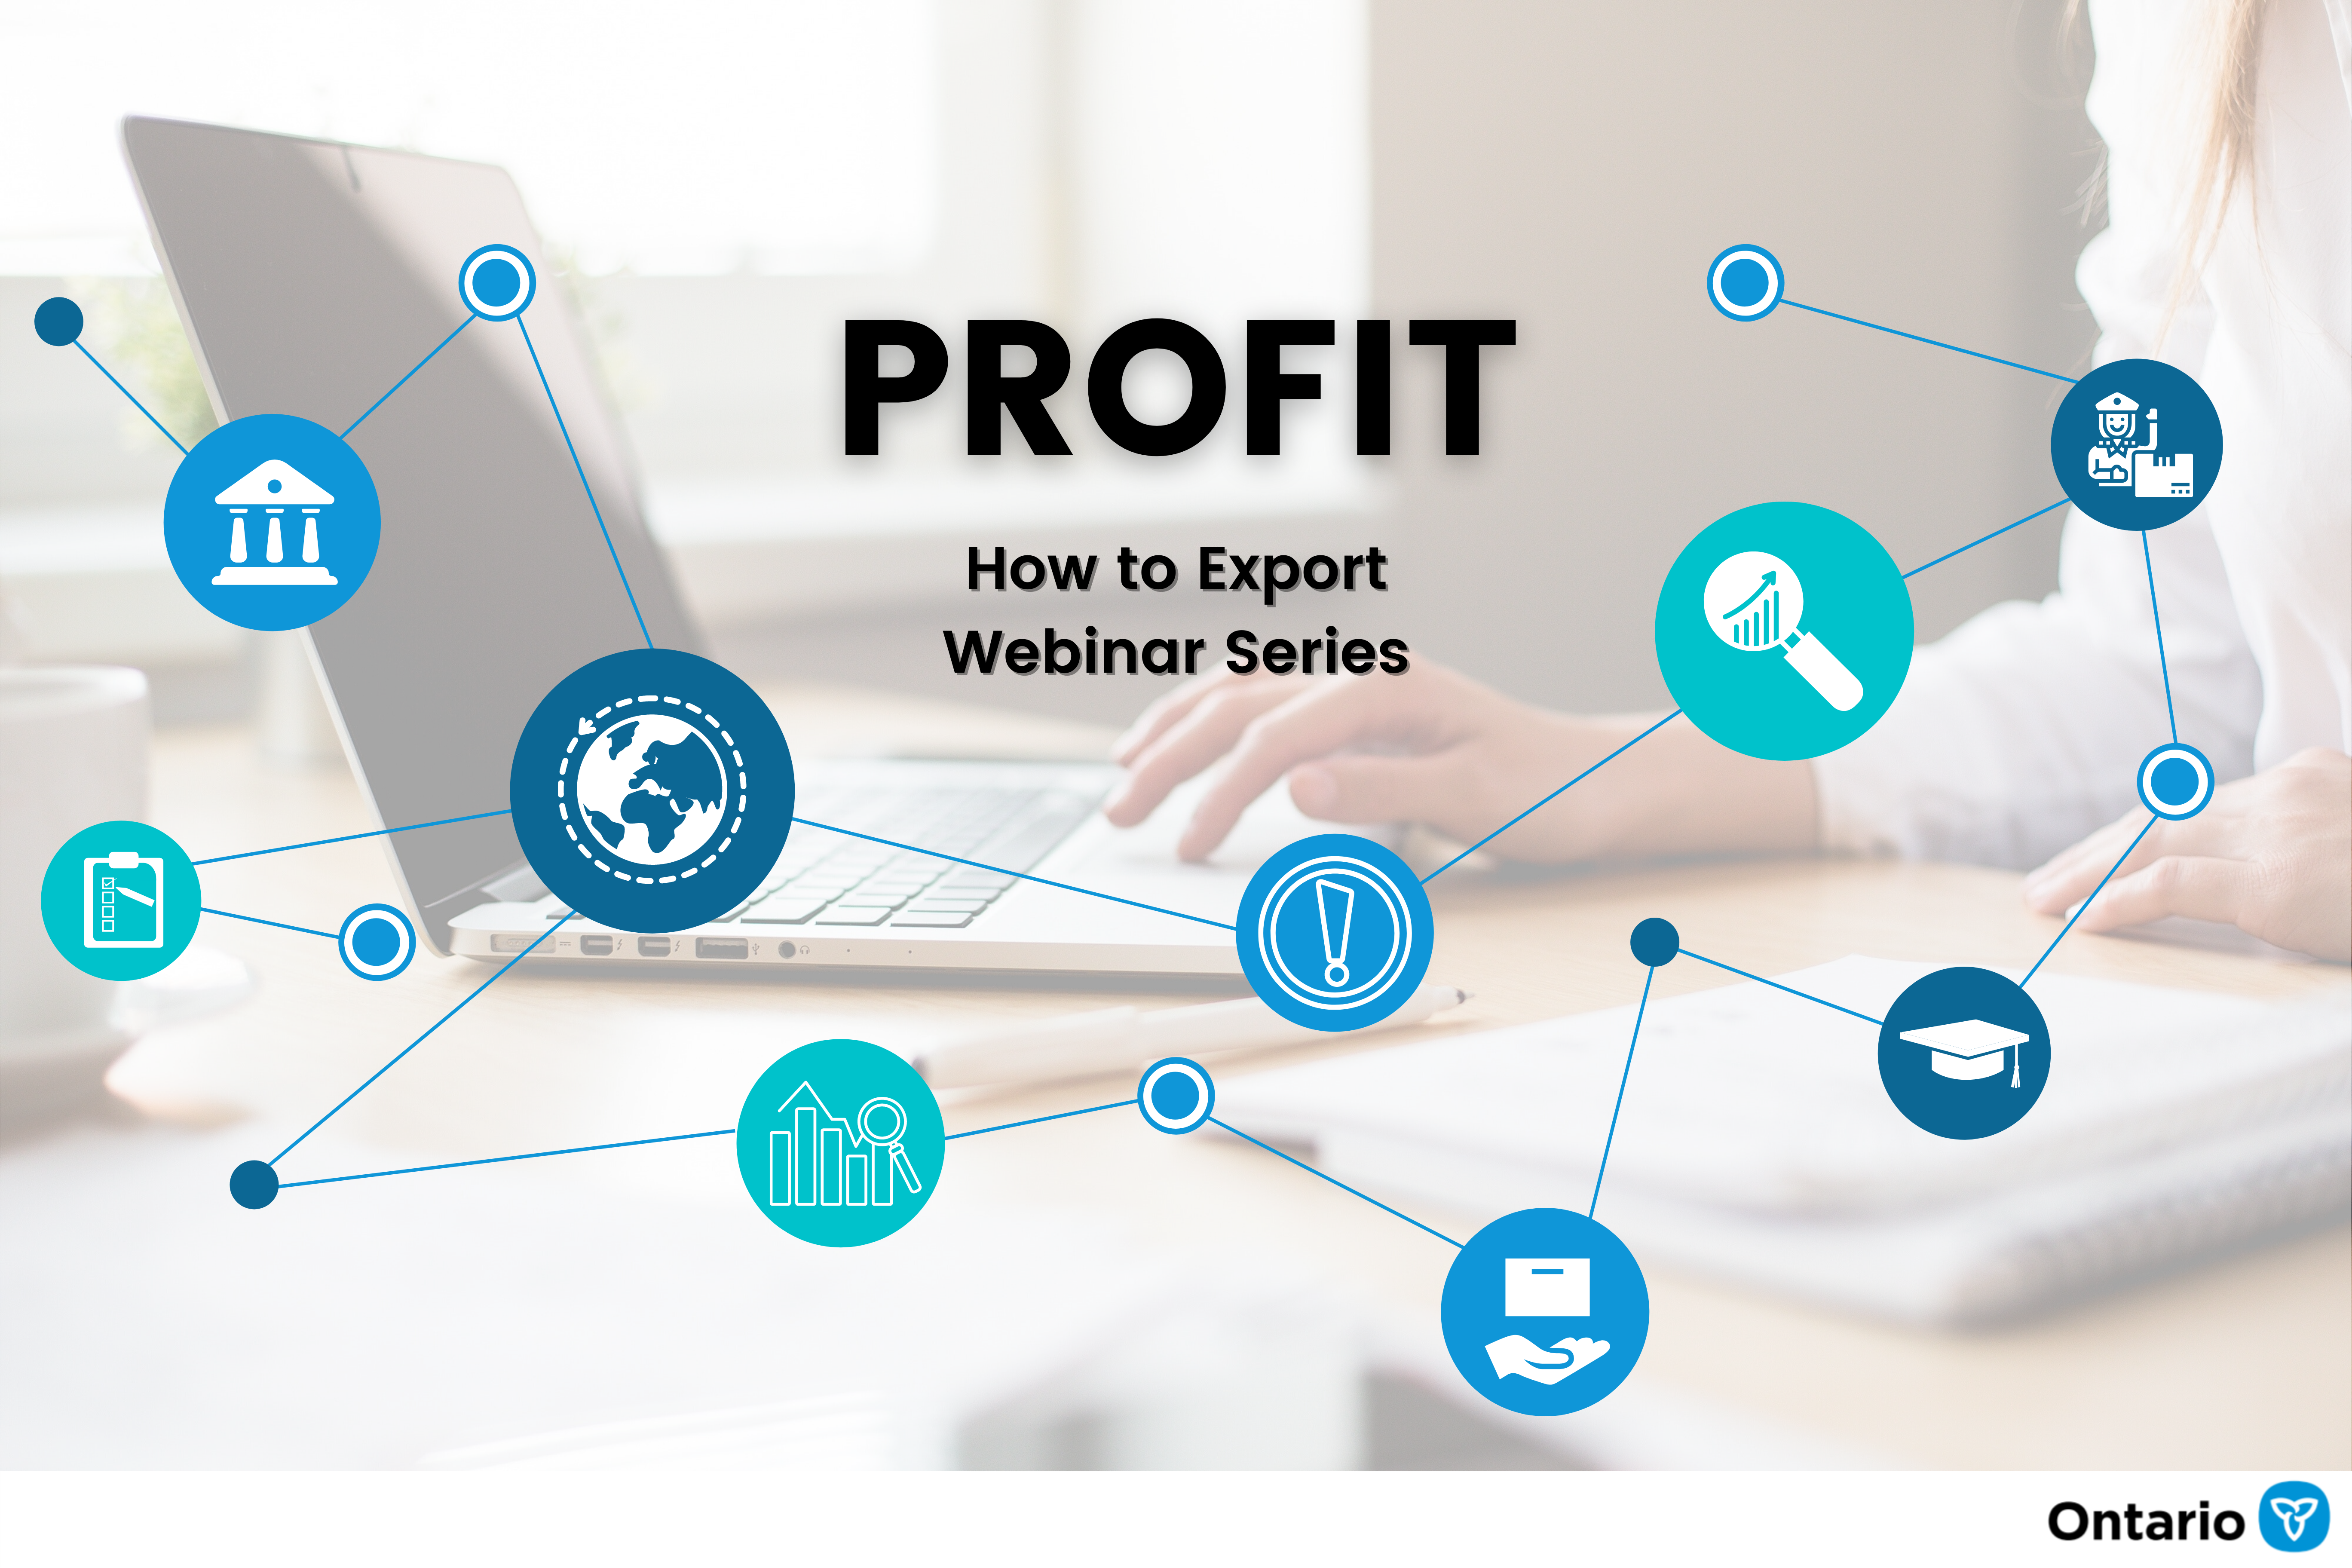 Curious About Exporting to the USA? Attend the Free PROFIT Webinar Series!